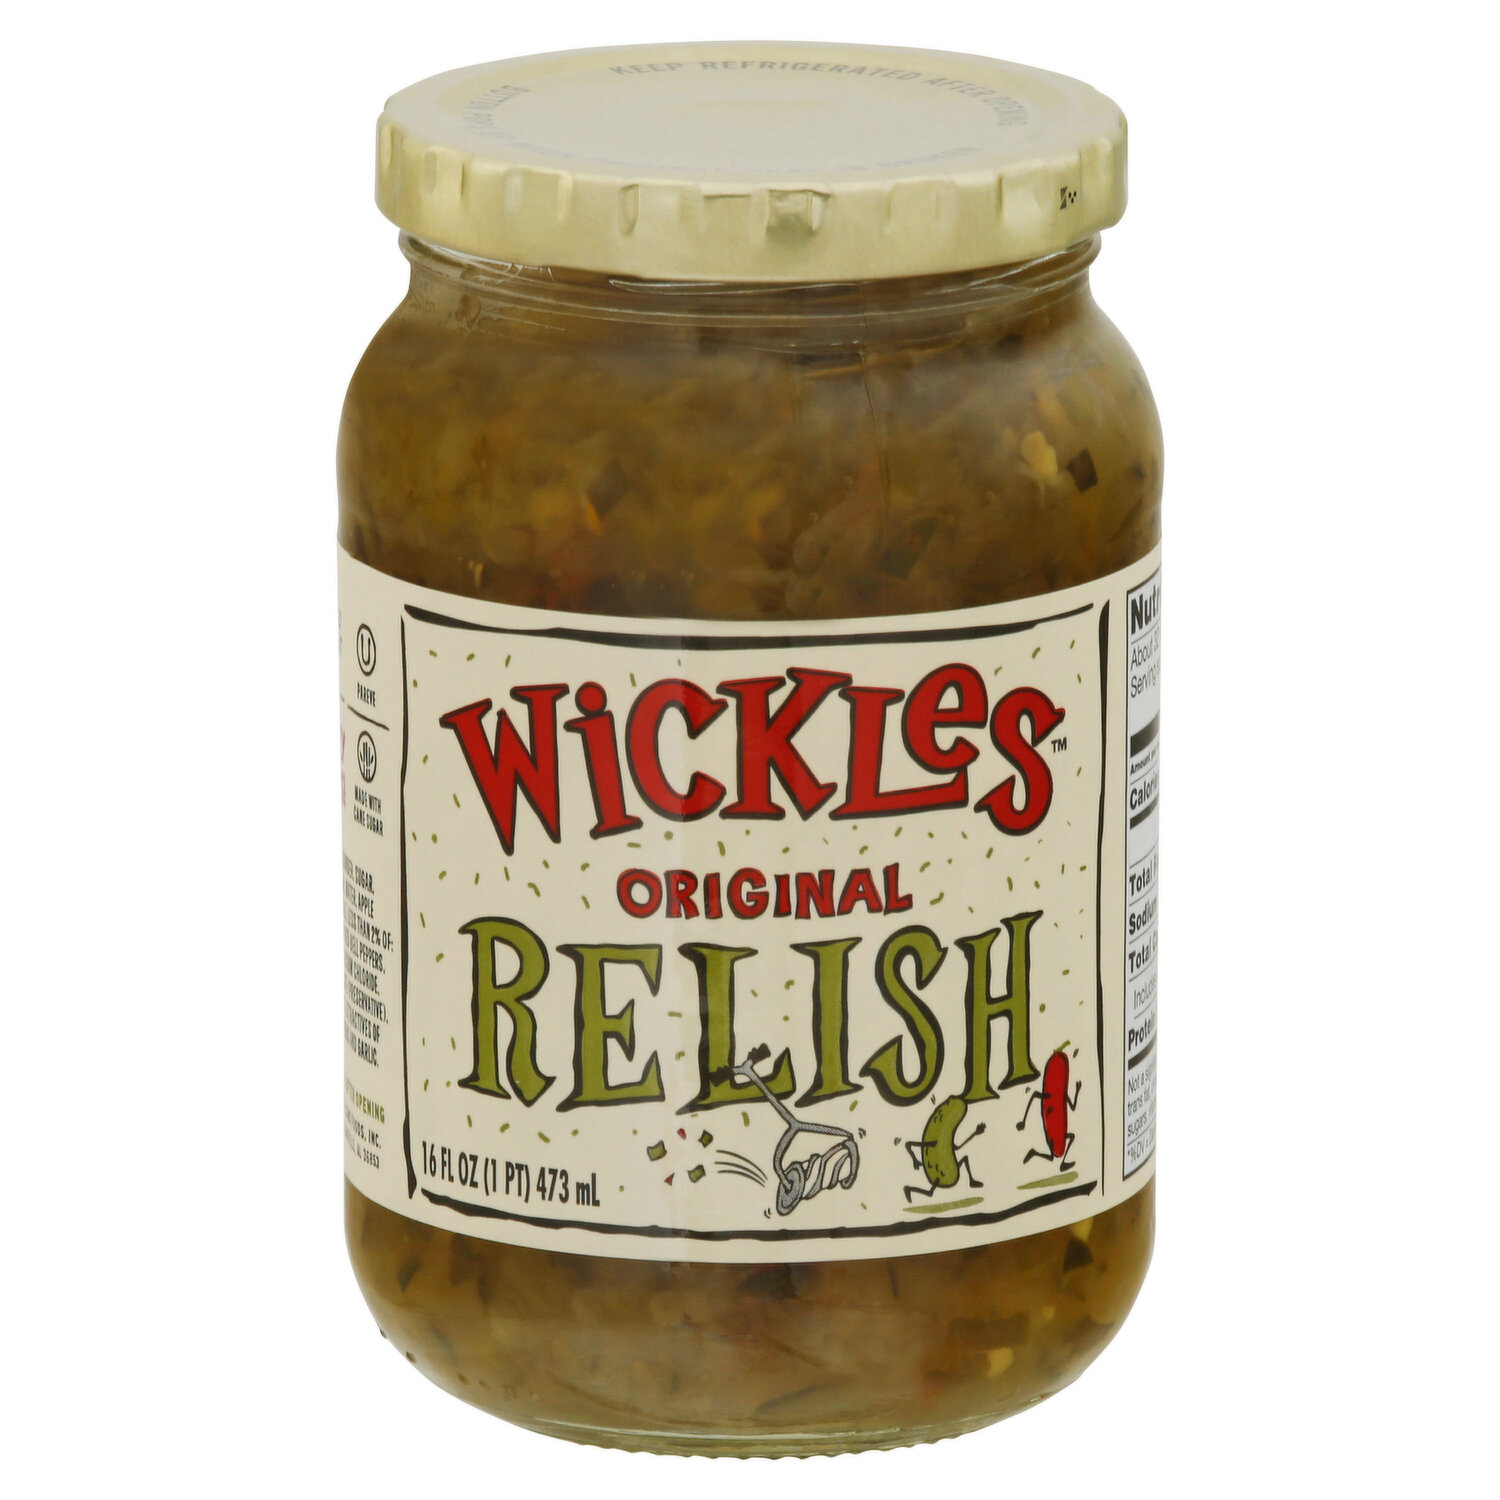 Wickles Wicked Pickles Chips: Nutrition & Ingredients